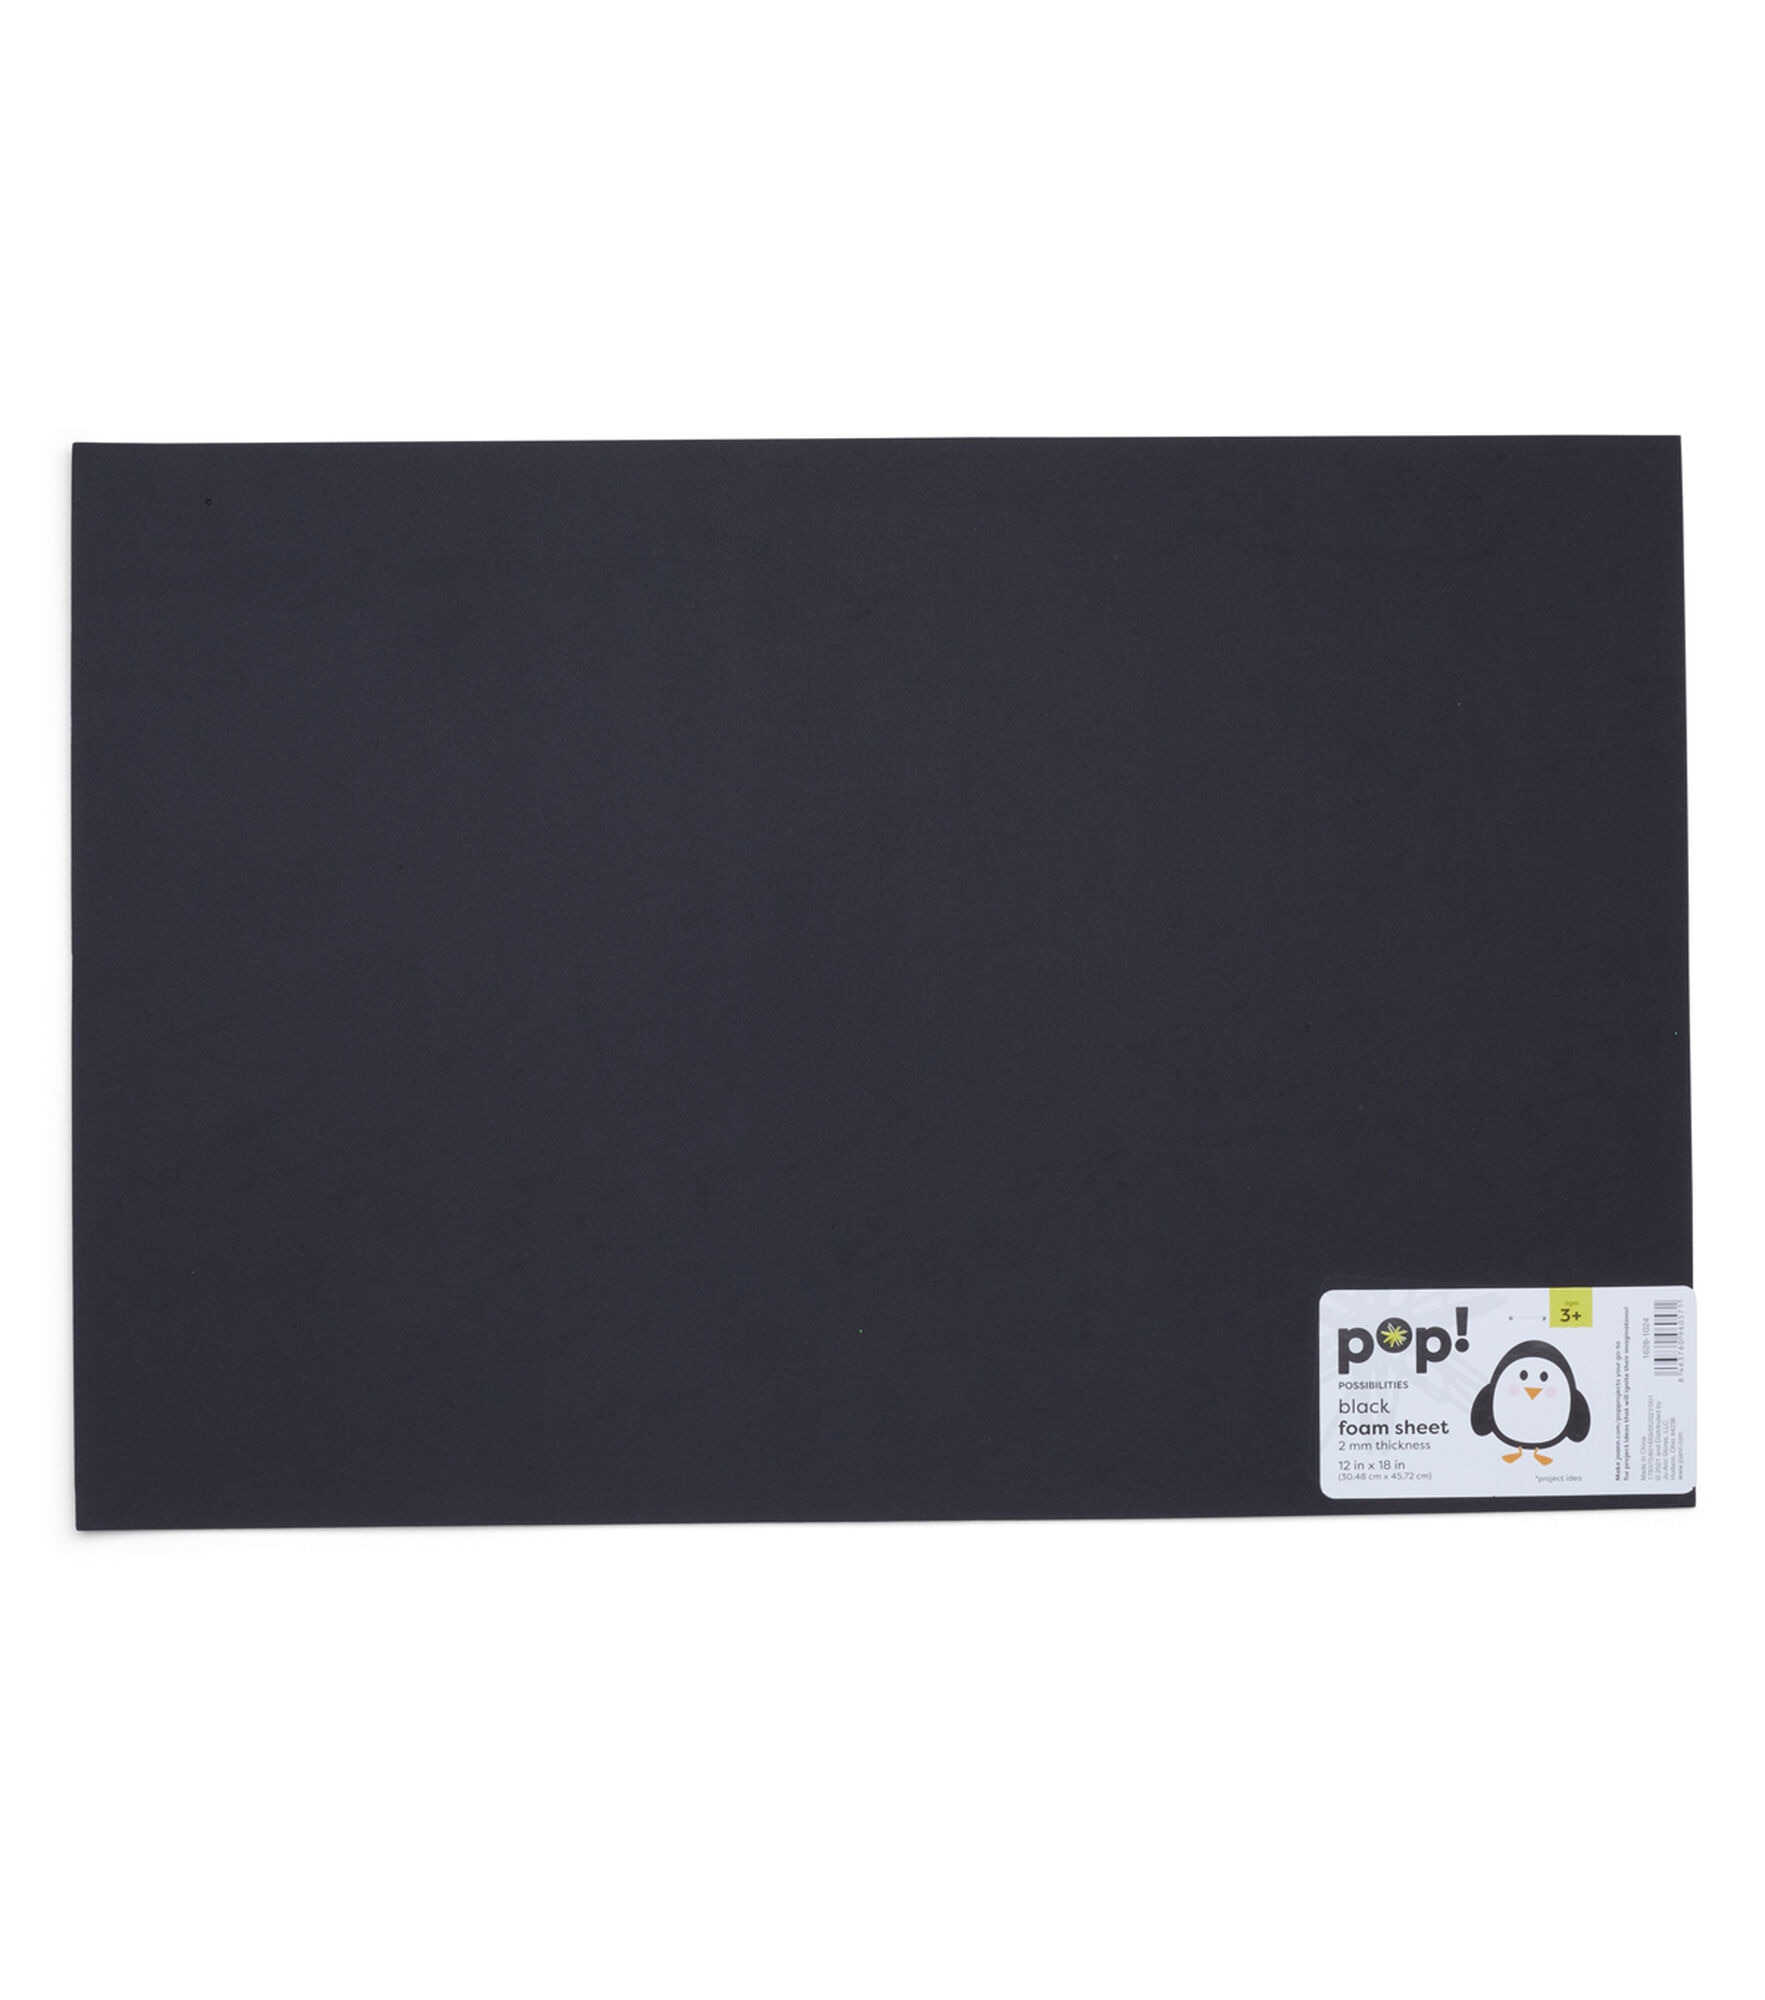 POP! Paper Pad Smooth 12x18 30 Sheets